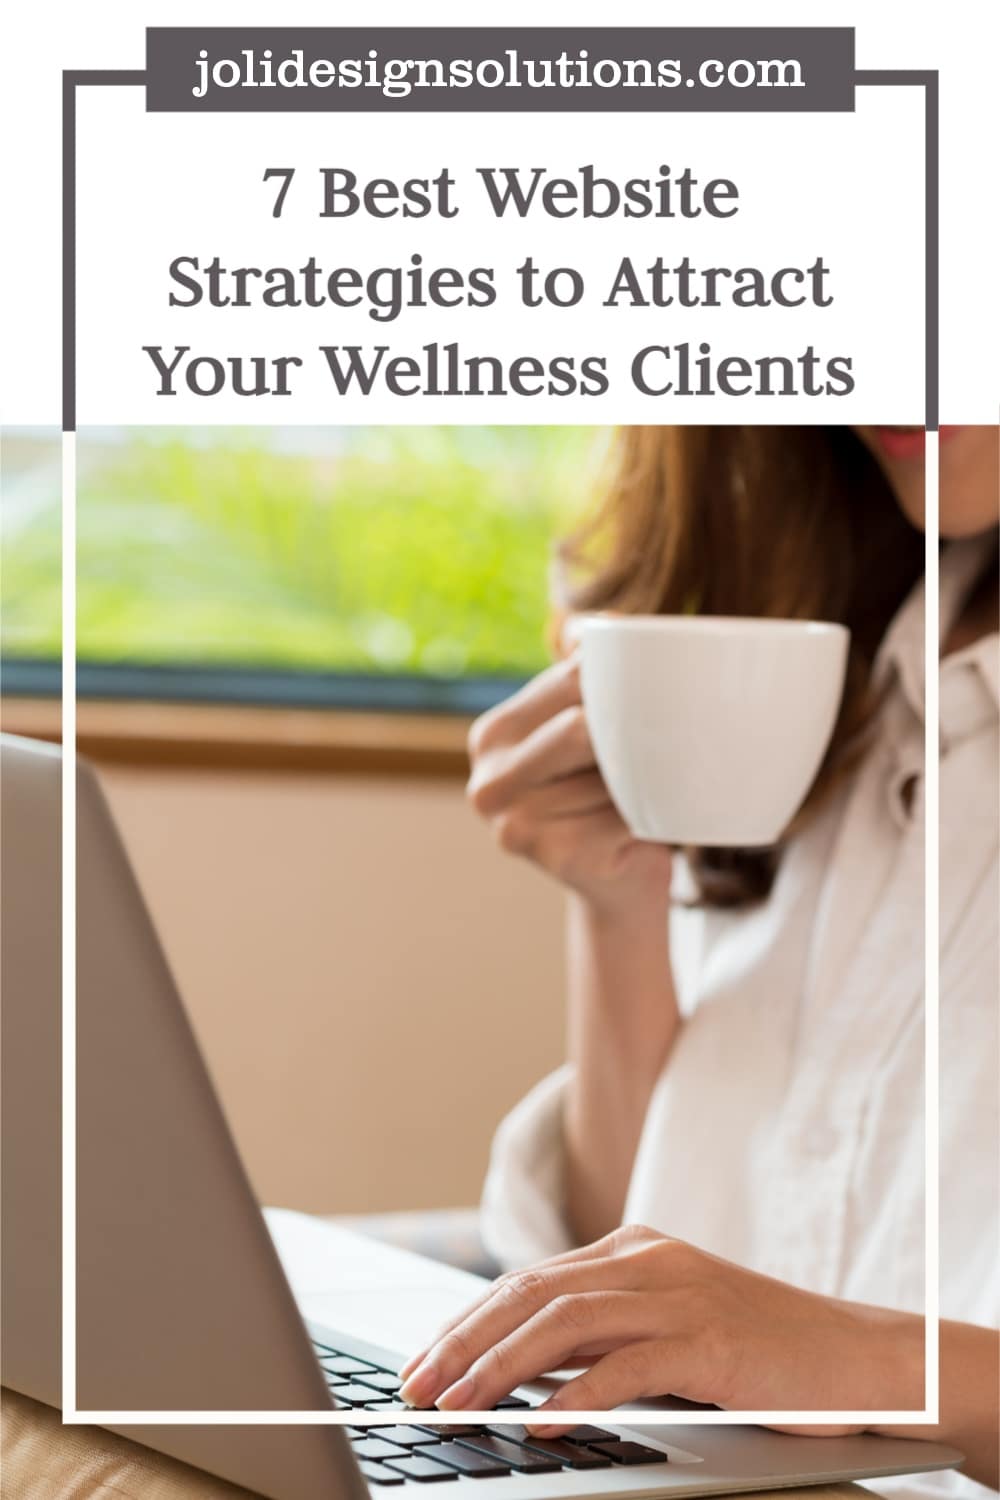 7-Best-Website-Strategies-to-Attract-Your-Wellness-Clients